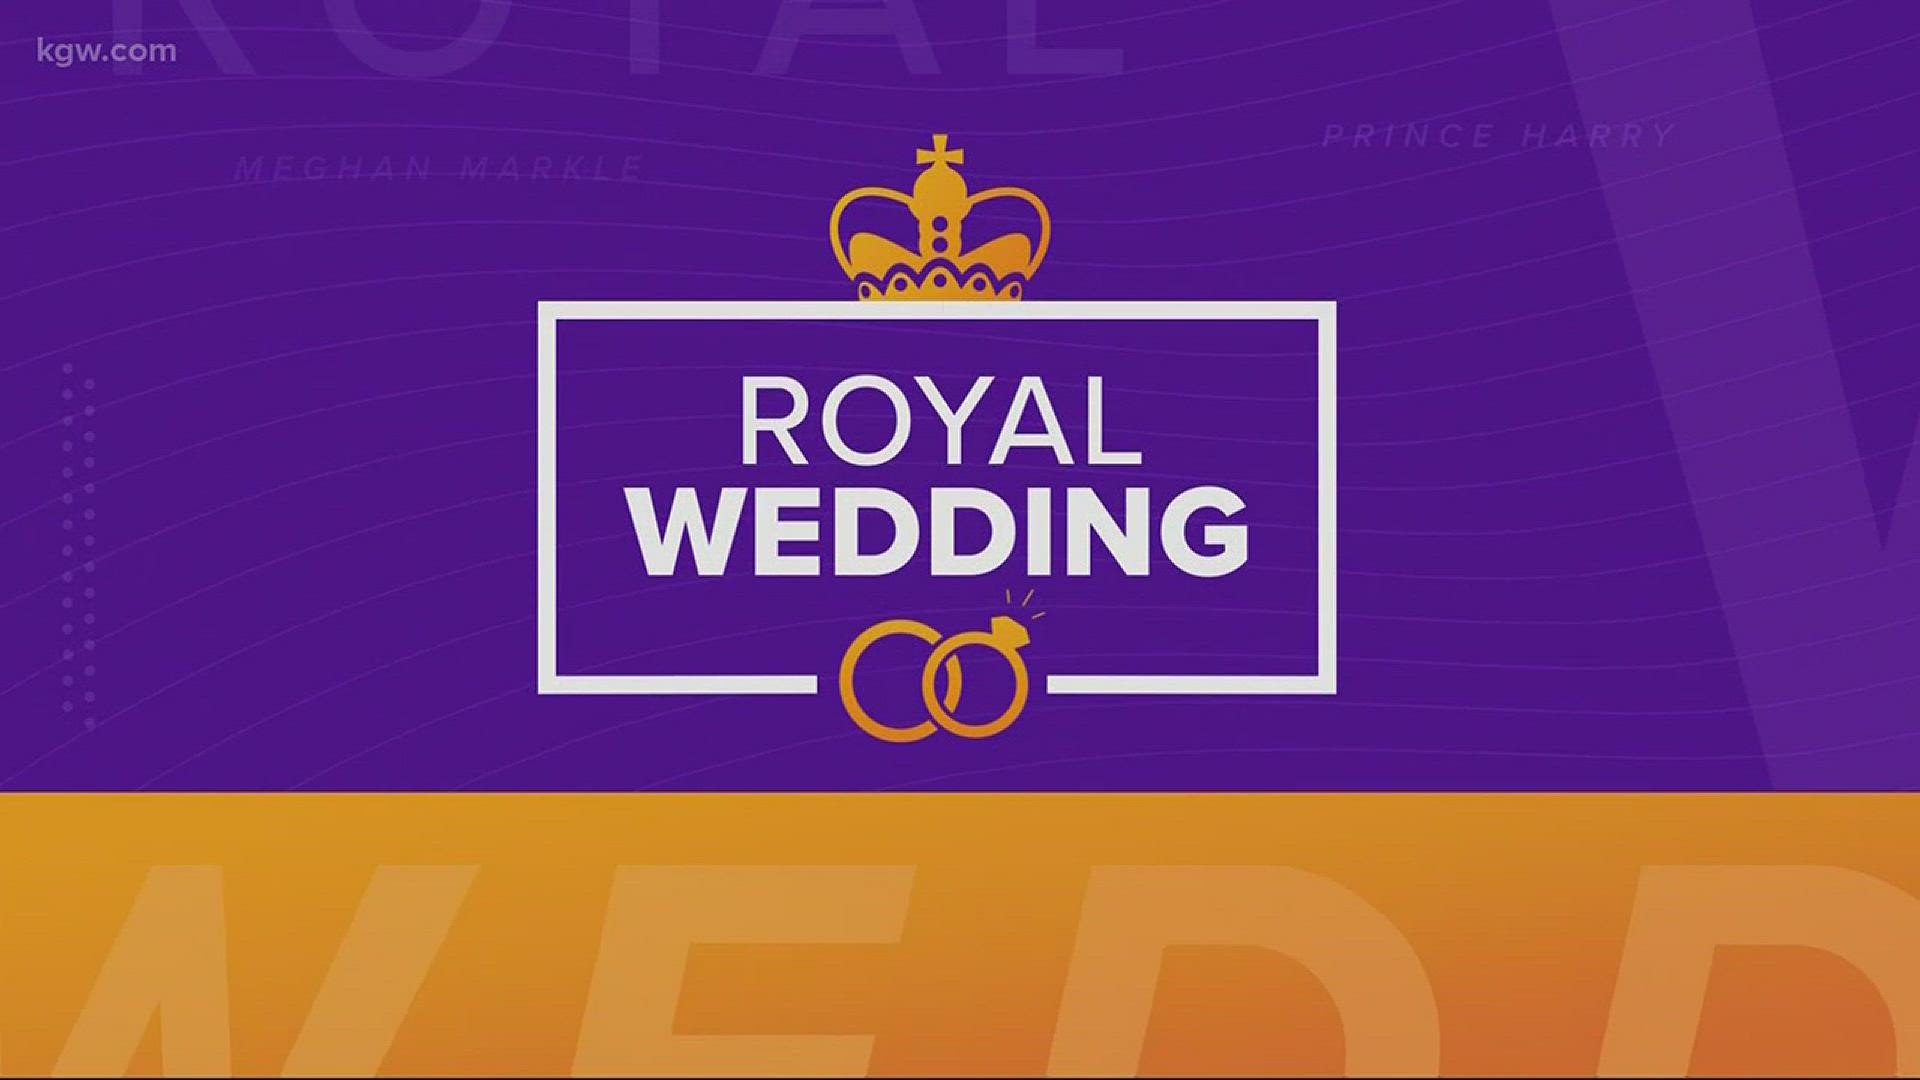 Is Cassidy going to the royal wedding?